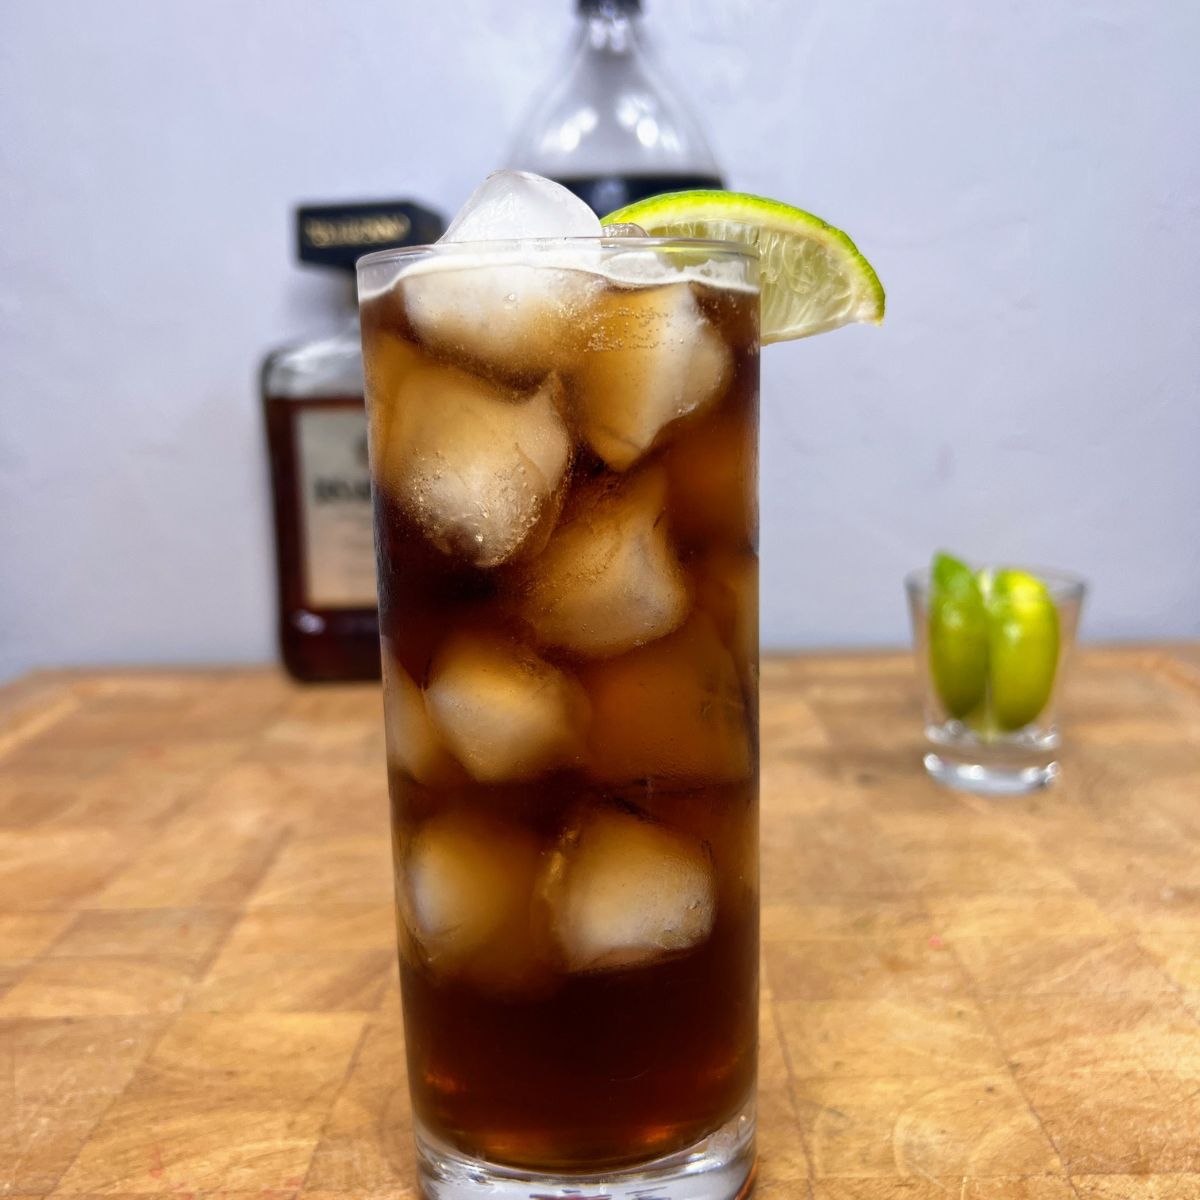 Close up of an amaretto and coke with a lime wedge on the rim.